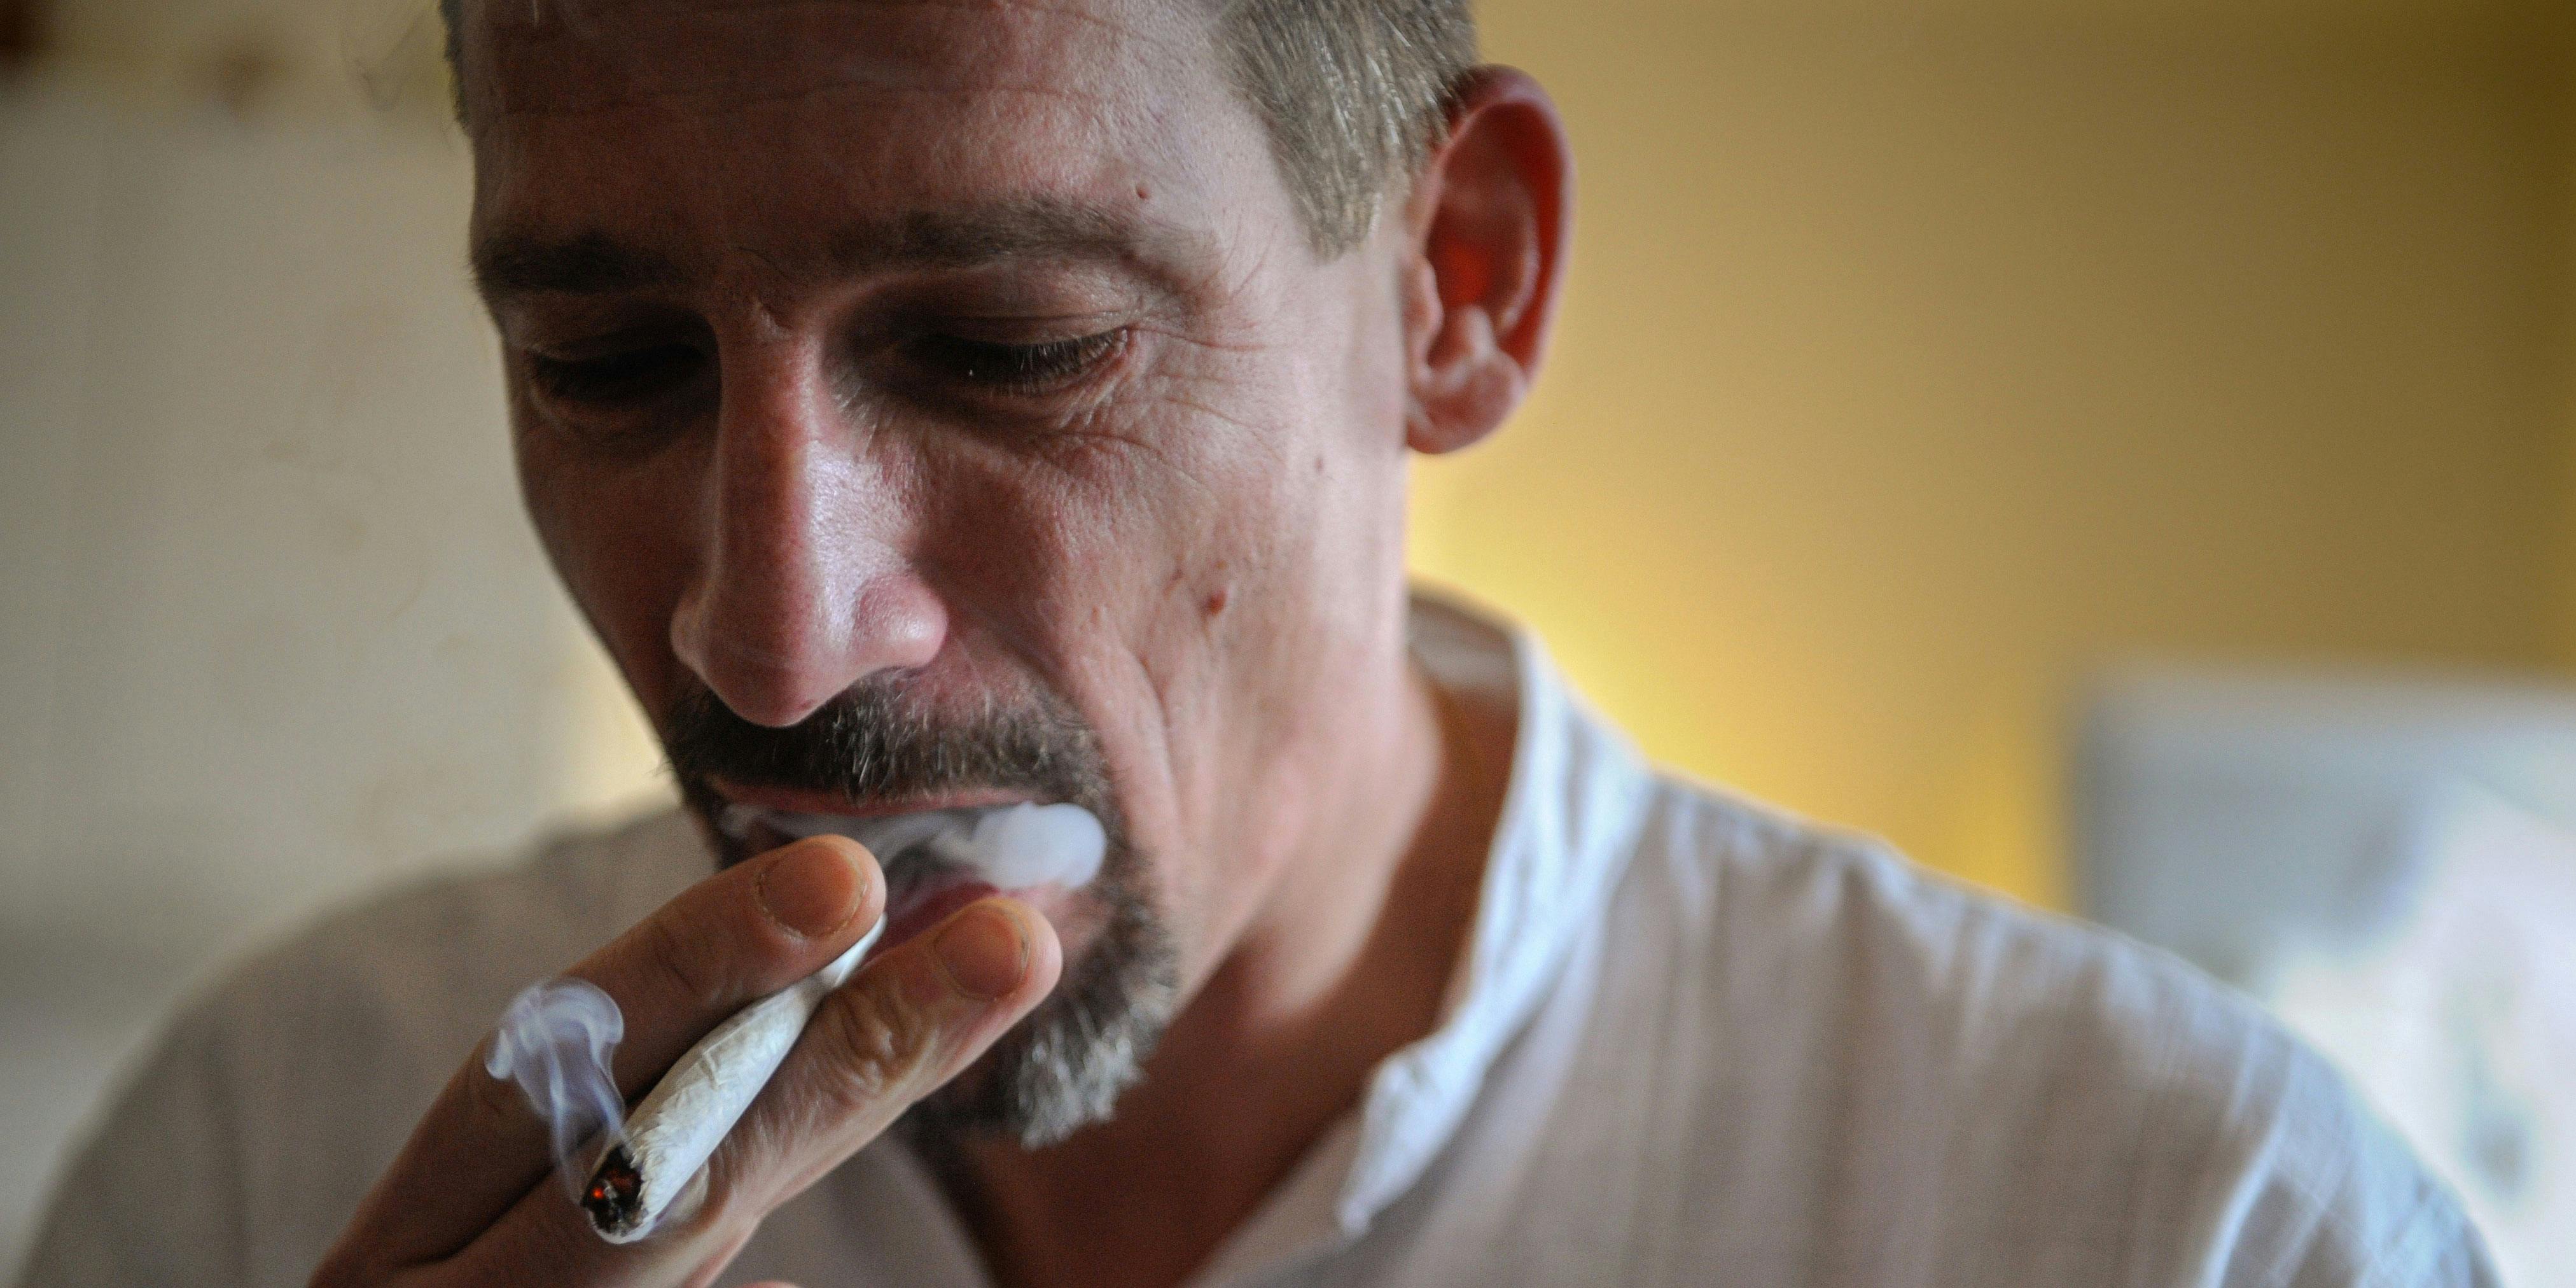 Dominique Loumachi, suffering from Dermatomyositis (Myopathy), smokes a cigarette that looks like a cannabis cigarette in order not to be charged for promoting consumption of narcotic substances while posing on February 28, 2013 in Belfort, Eastern France. Rhode Island dispensaries recently announced that they would recognize out-of-state medical marijuana licenses.